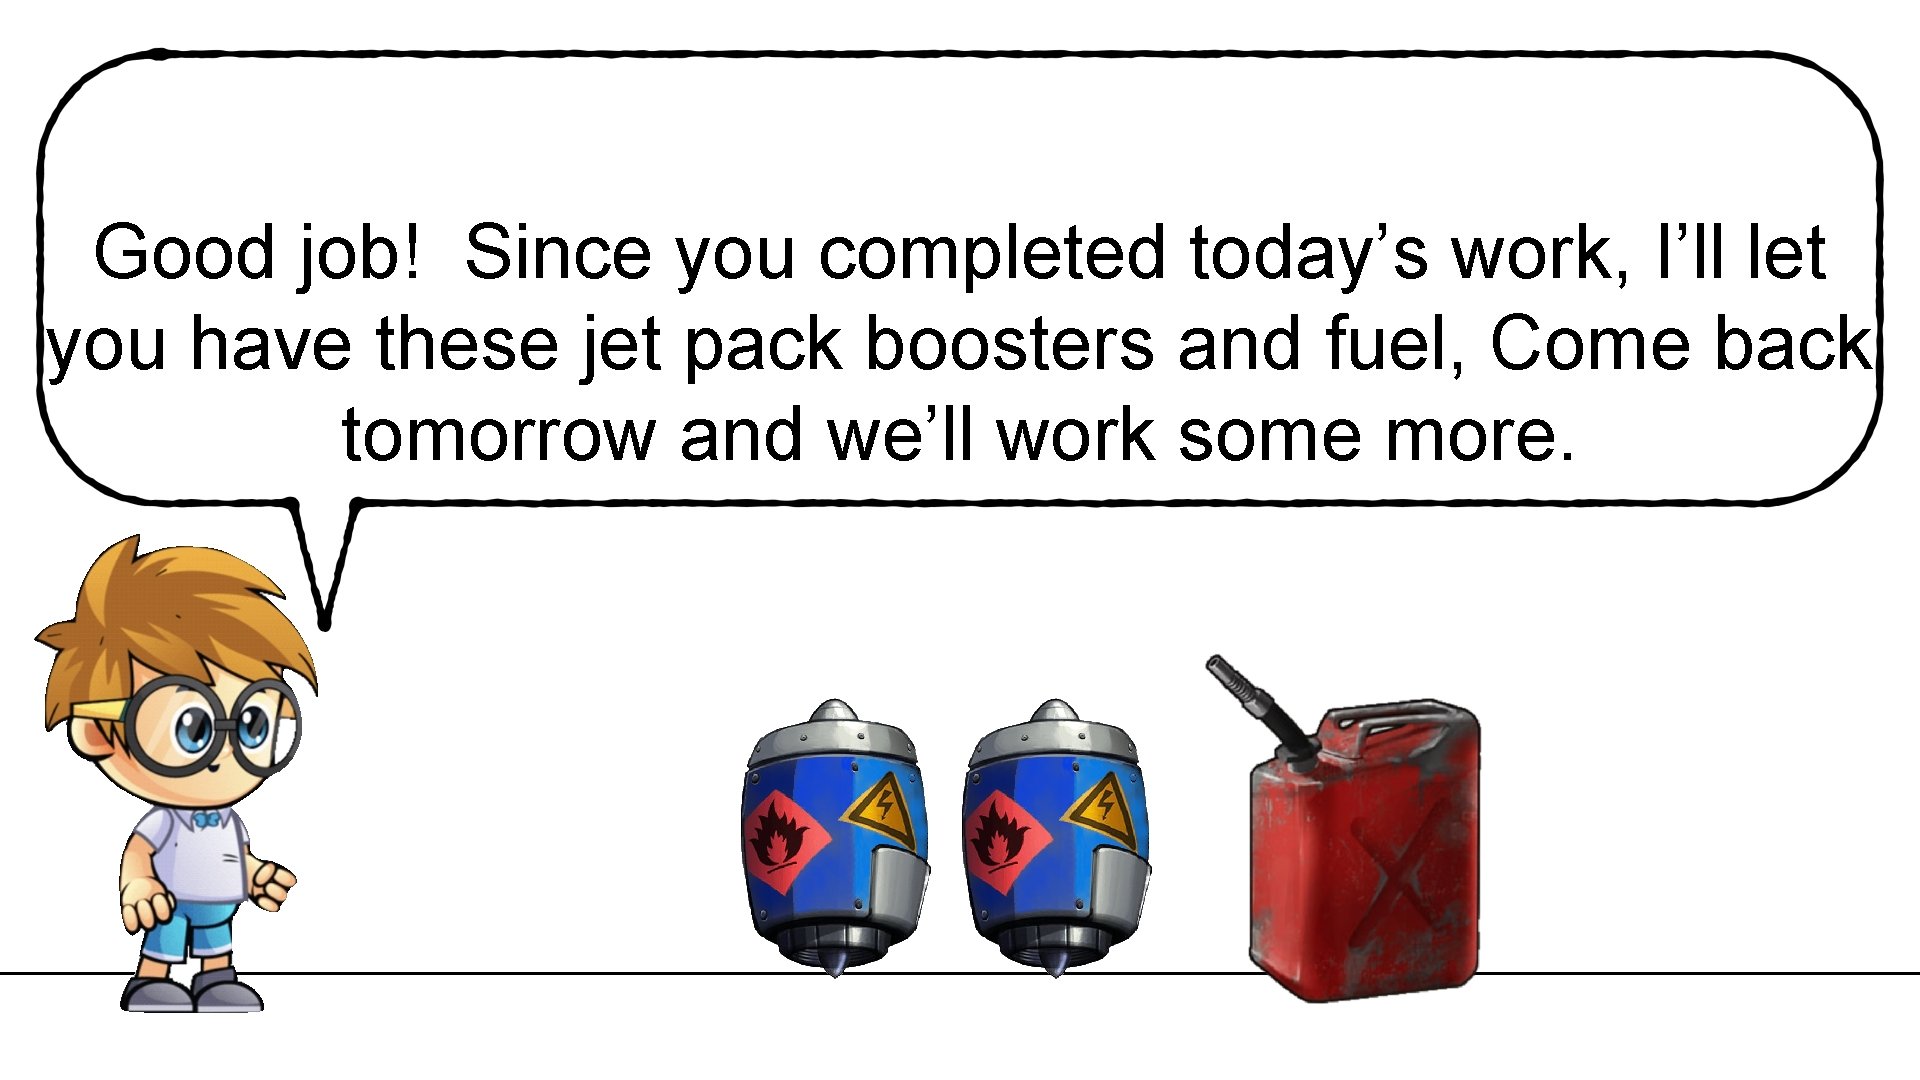 Good job! Since you completed today’s work, I’ll let you have these jet pack